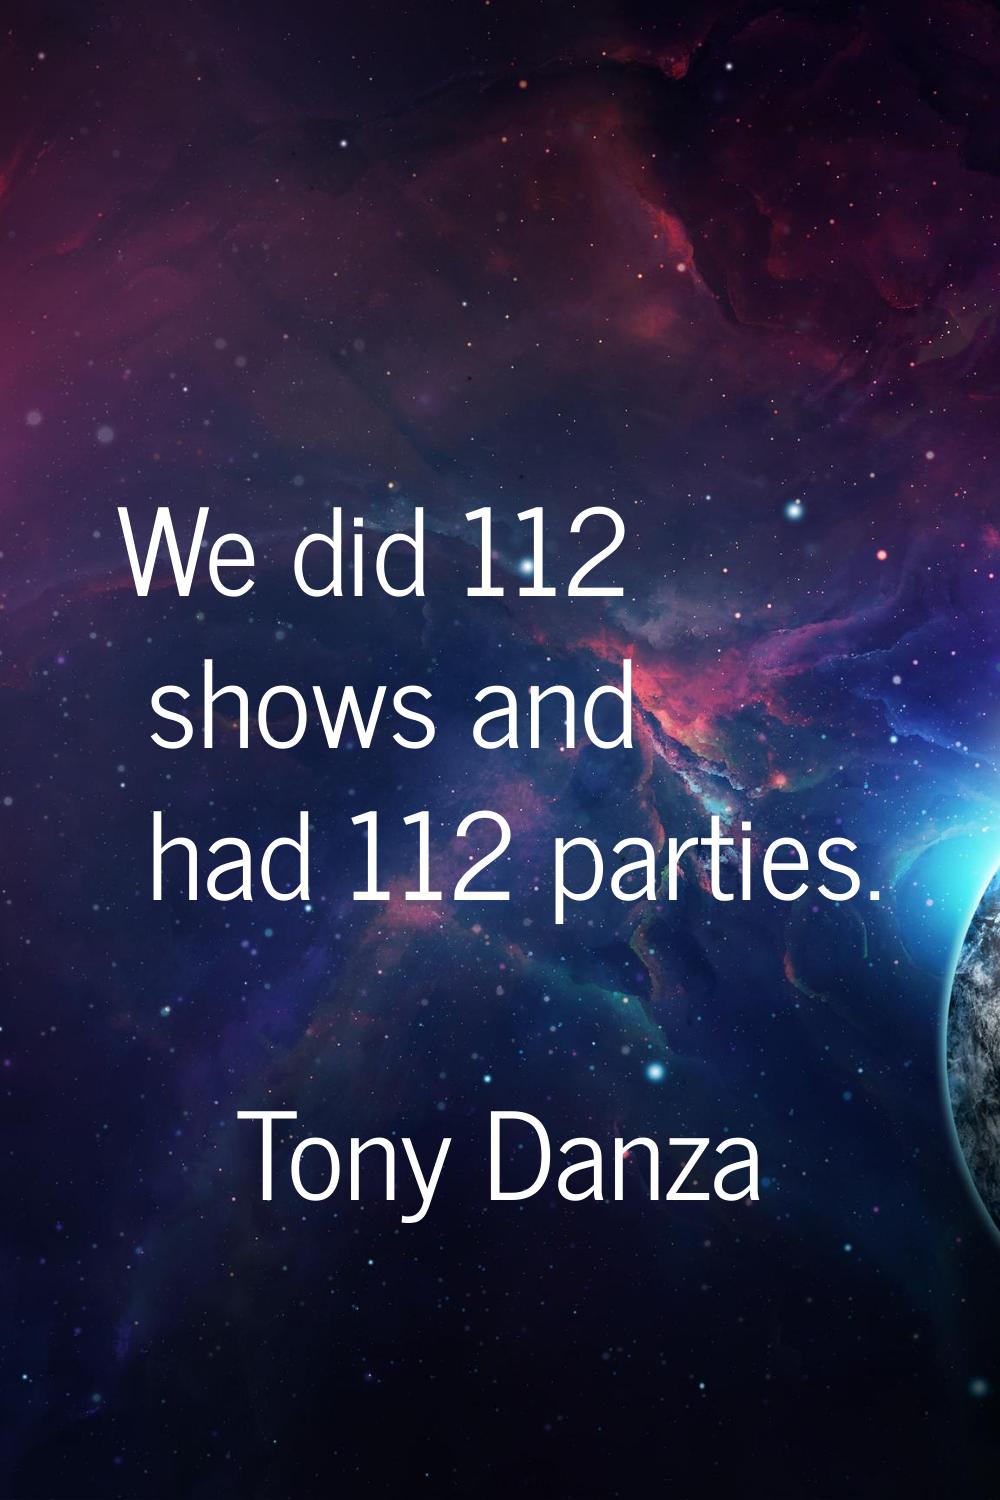 We did 112 shows and had 112 parties.